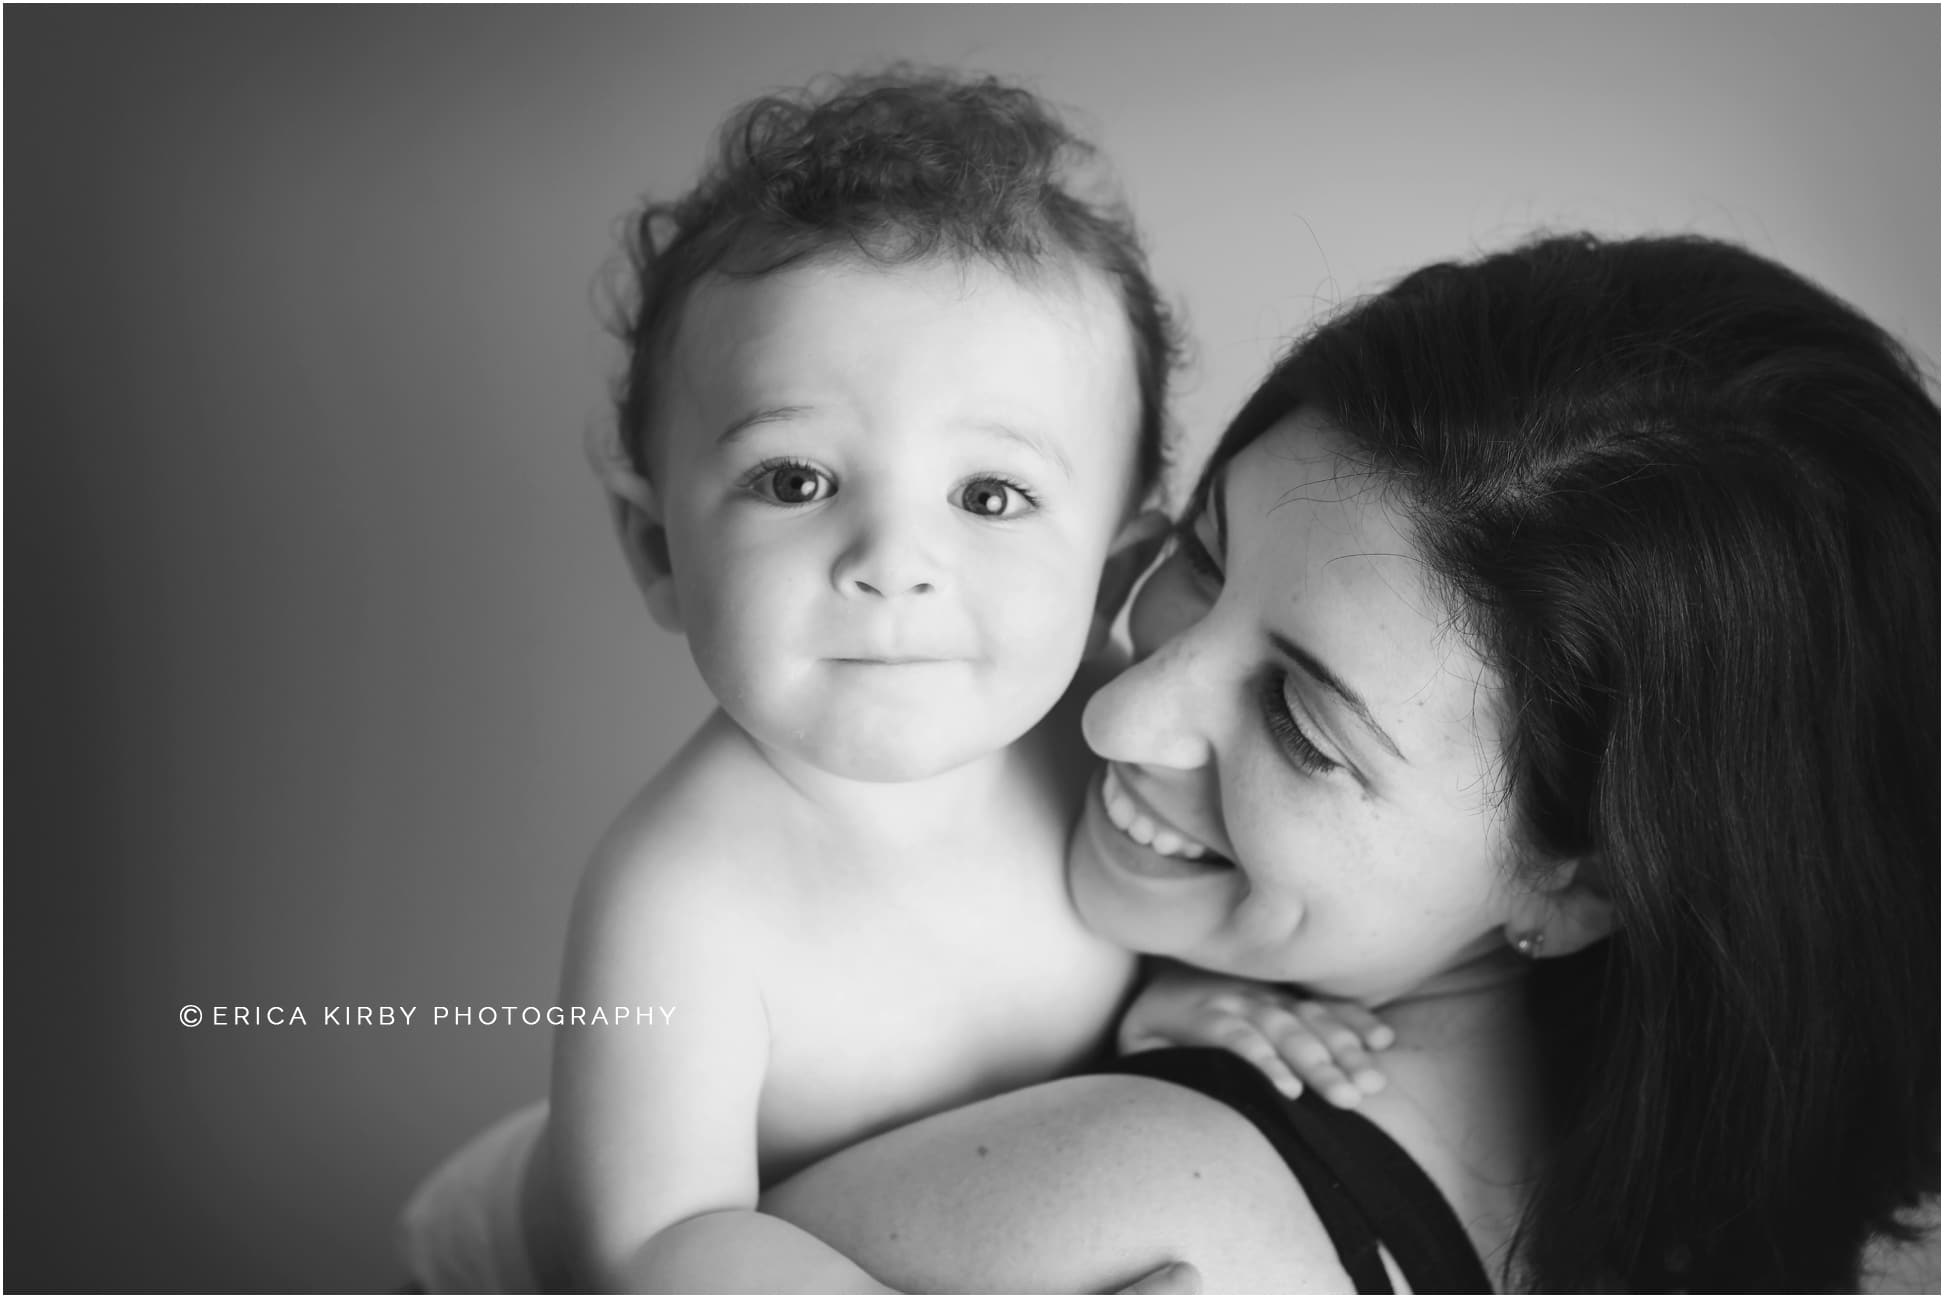 Bentonville AR Baby Photographer | one year old baby boy milestone photo session black and white images with mom | Erica Kirby Photography Northwest Arkansas